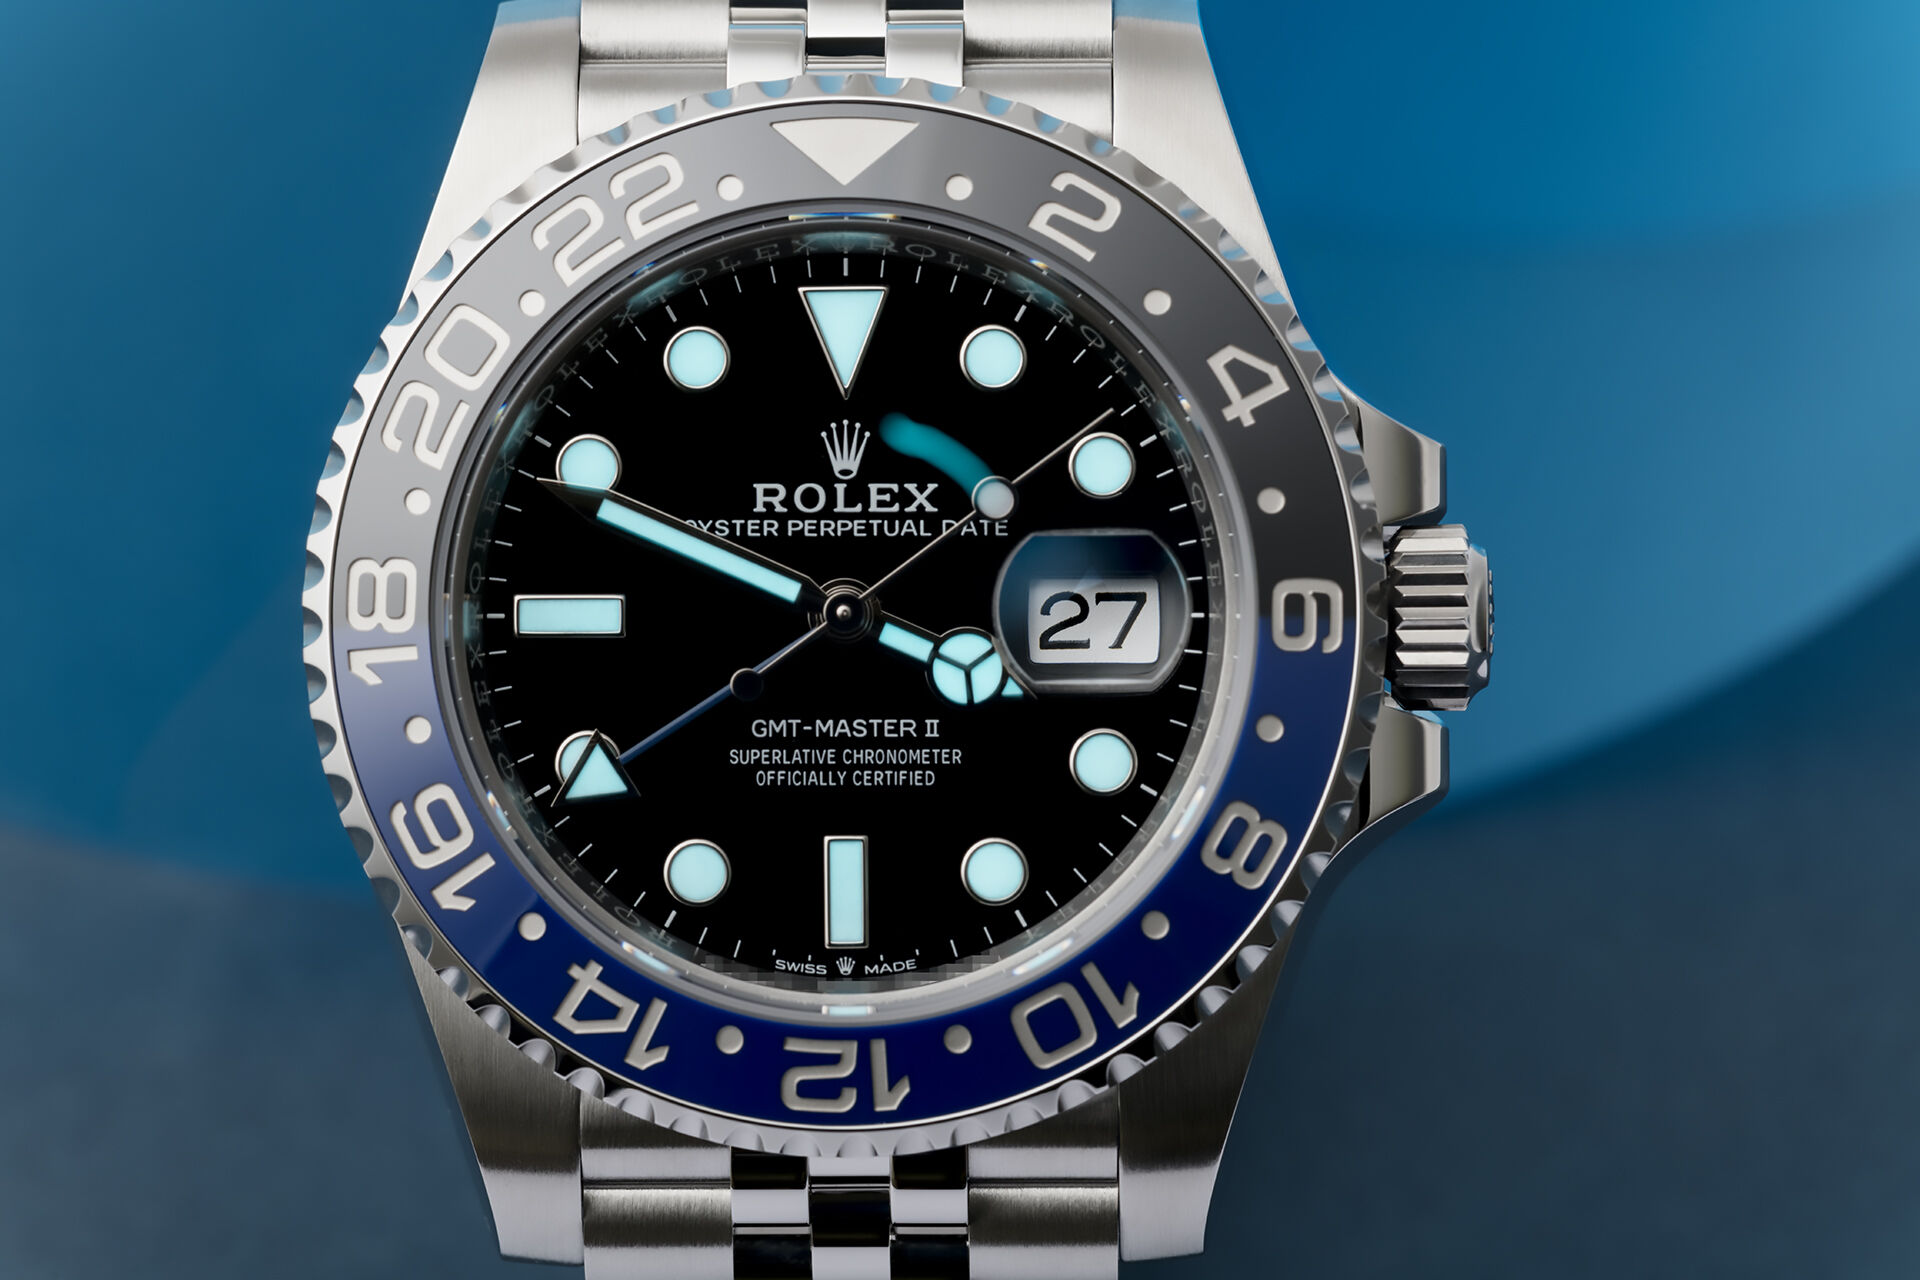 ref 126710BLNR | UK-Supplied, Box and Certificate  | Rolex GMT-Master II